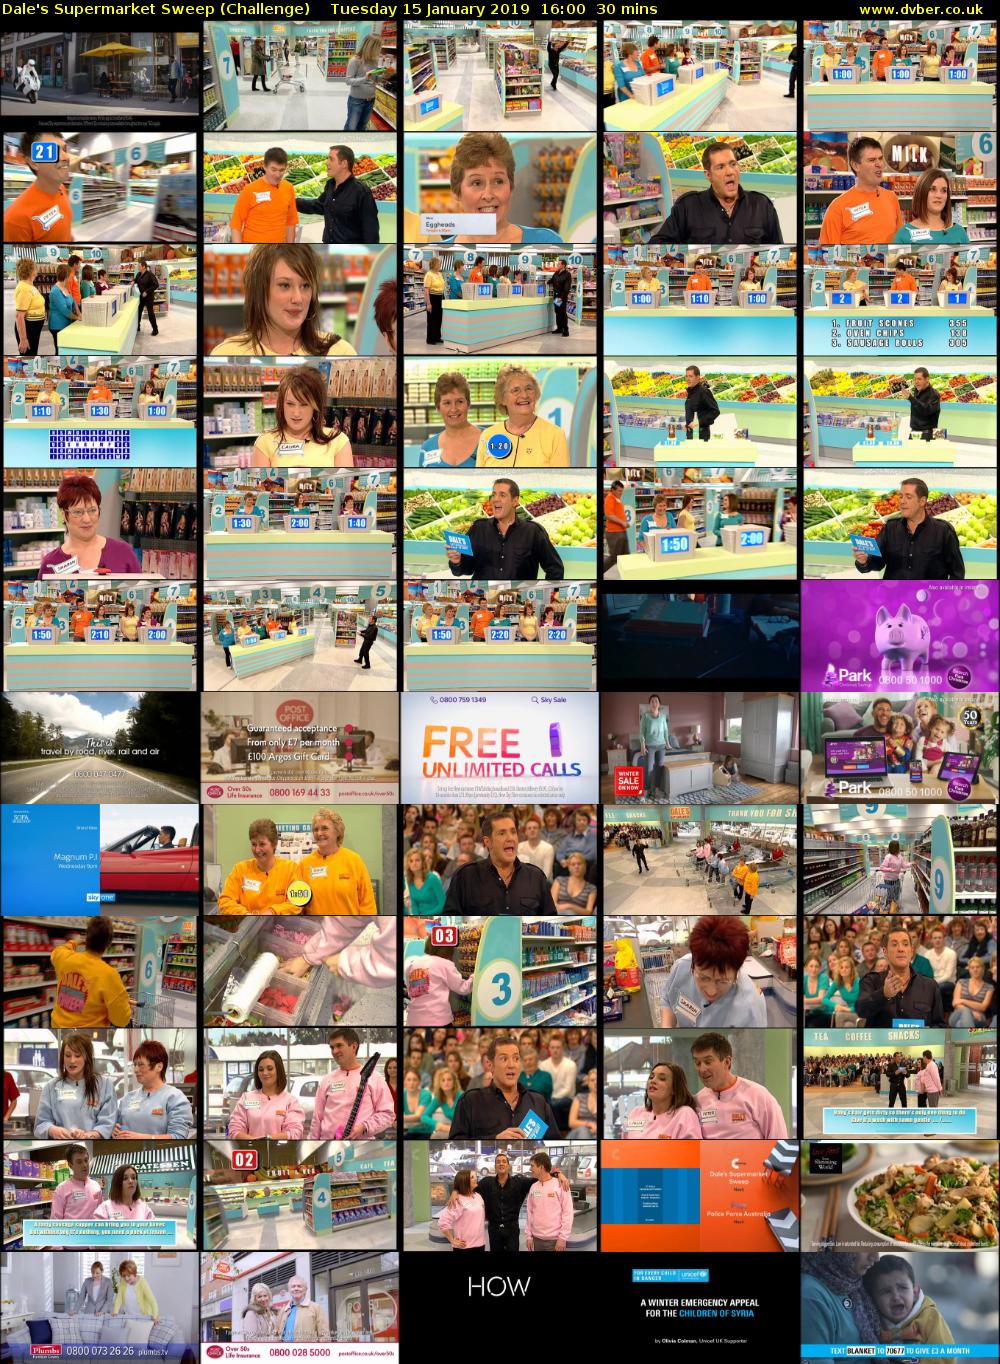 Dale's Supermarket Sweep (Challenge) Tuesday 15 January 2019 16:00 - 16:30